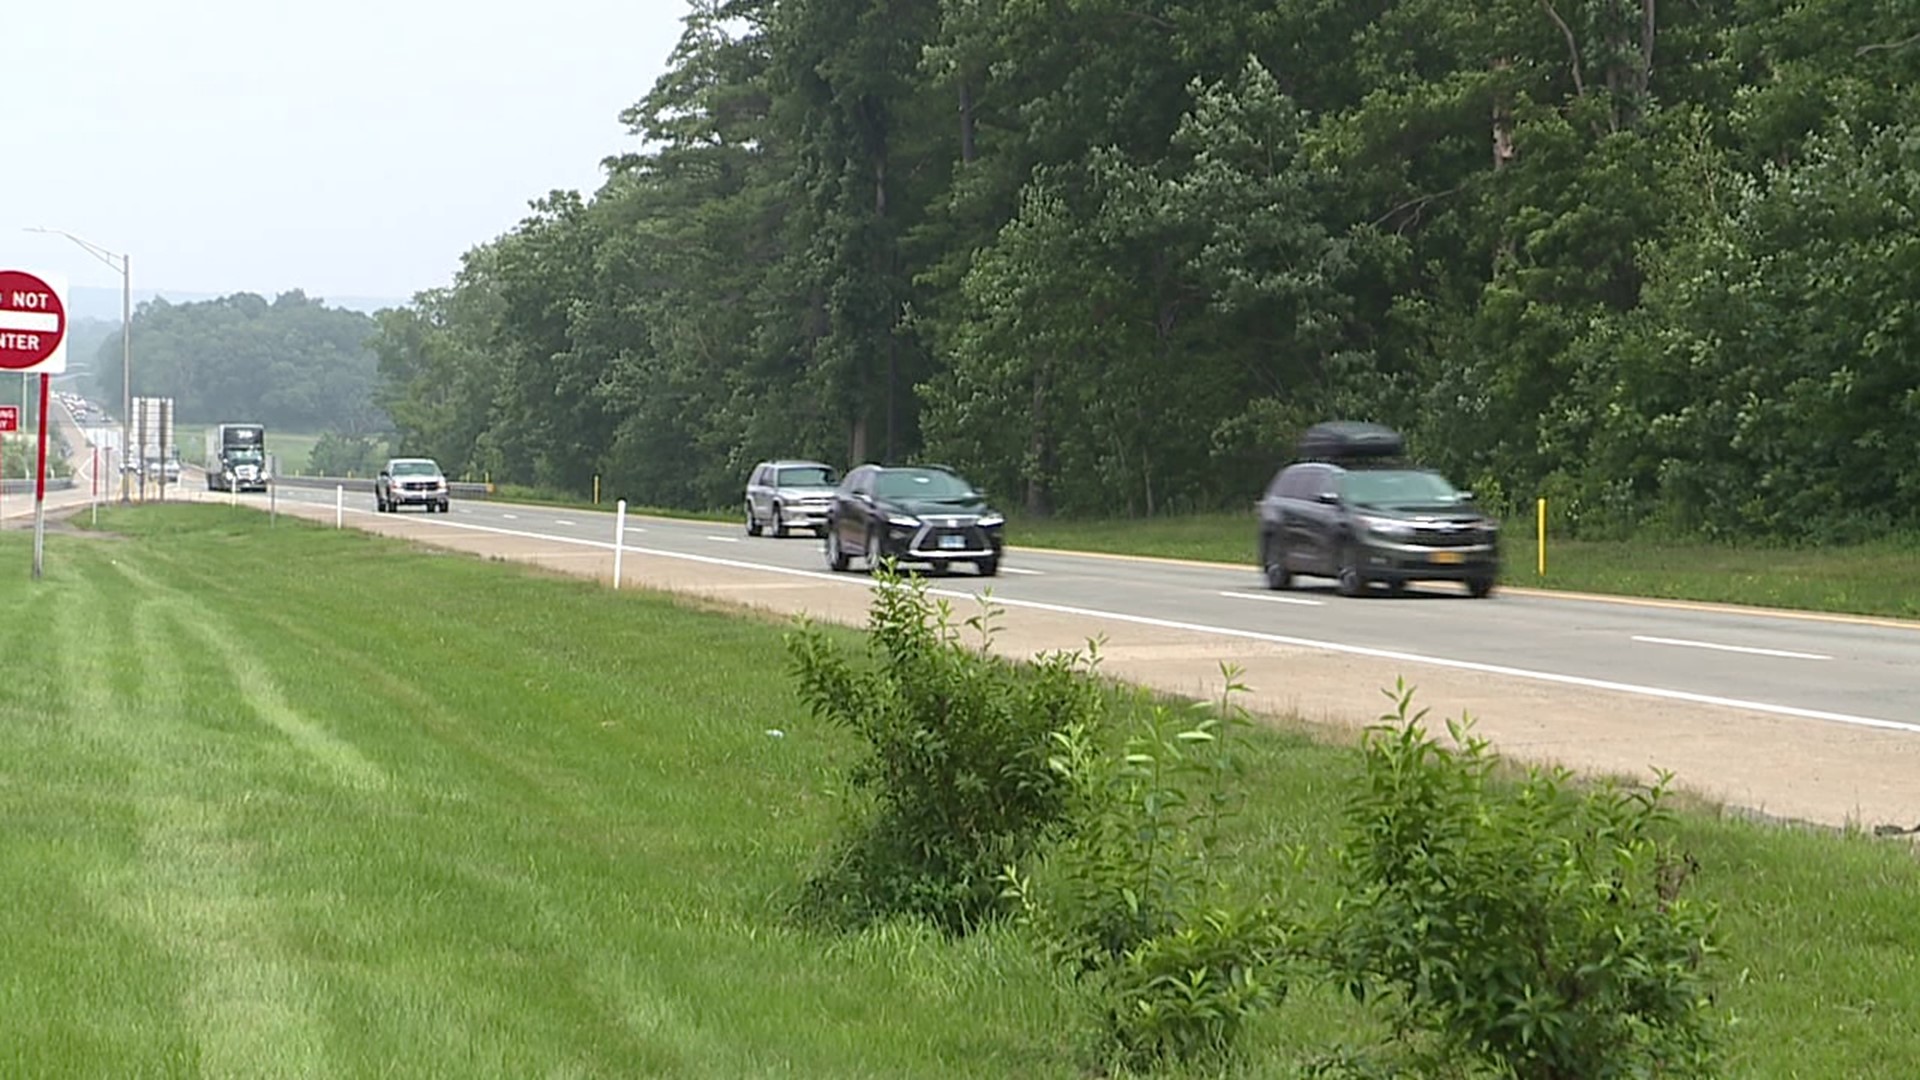 Newswatch 16's Emily Kress found lots of travelers taking a break from driving in Luzerne County.